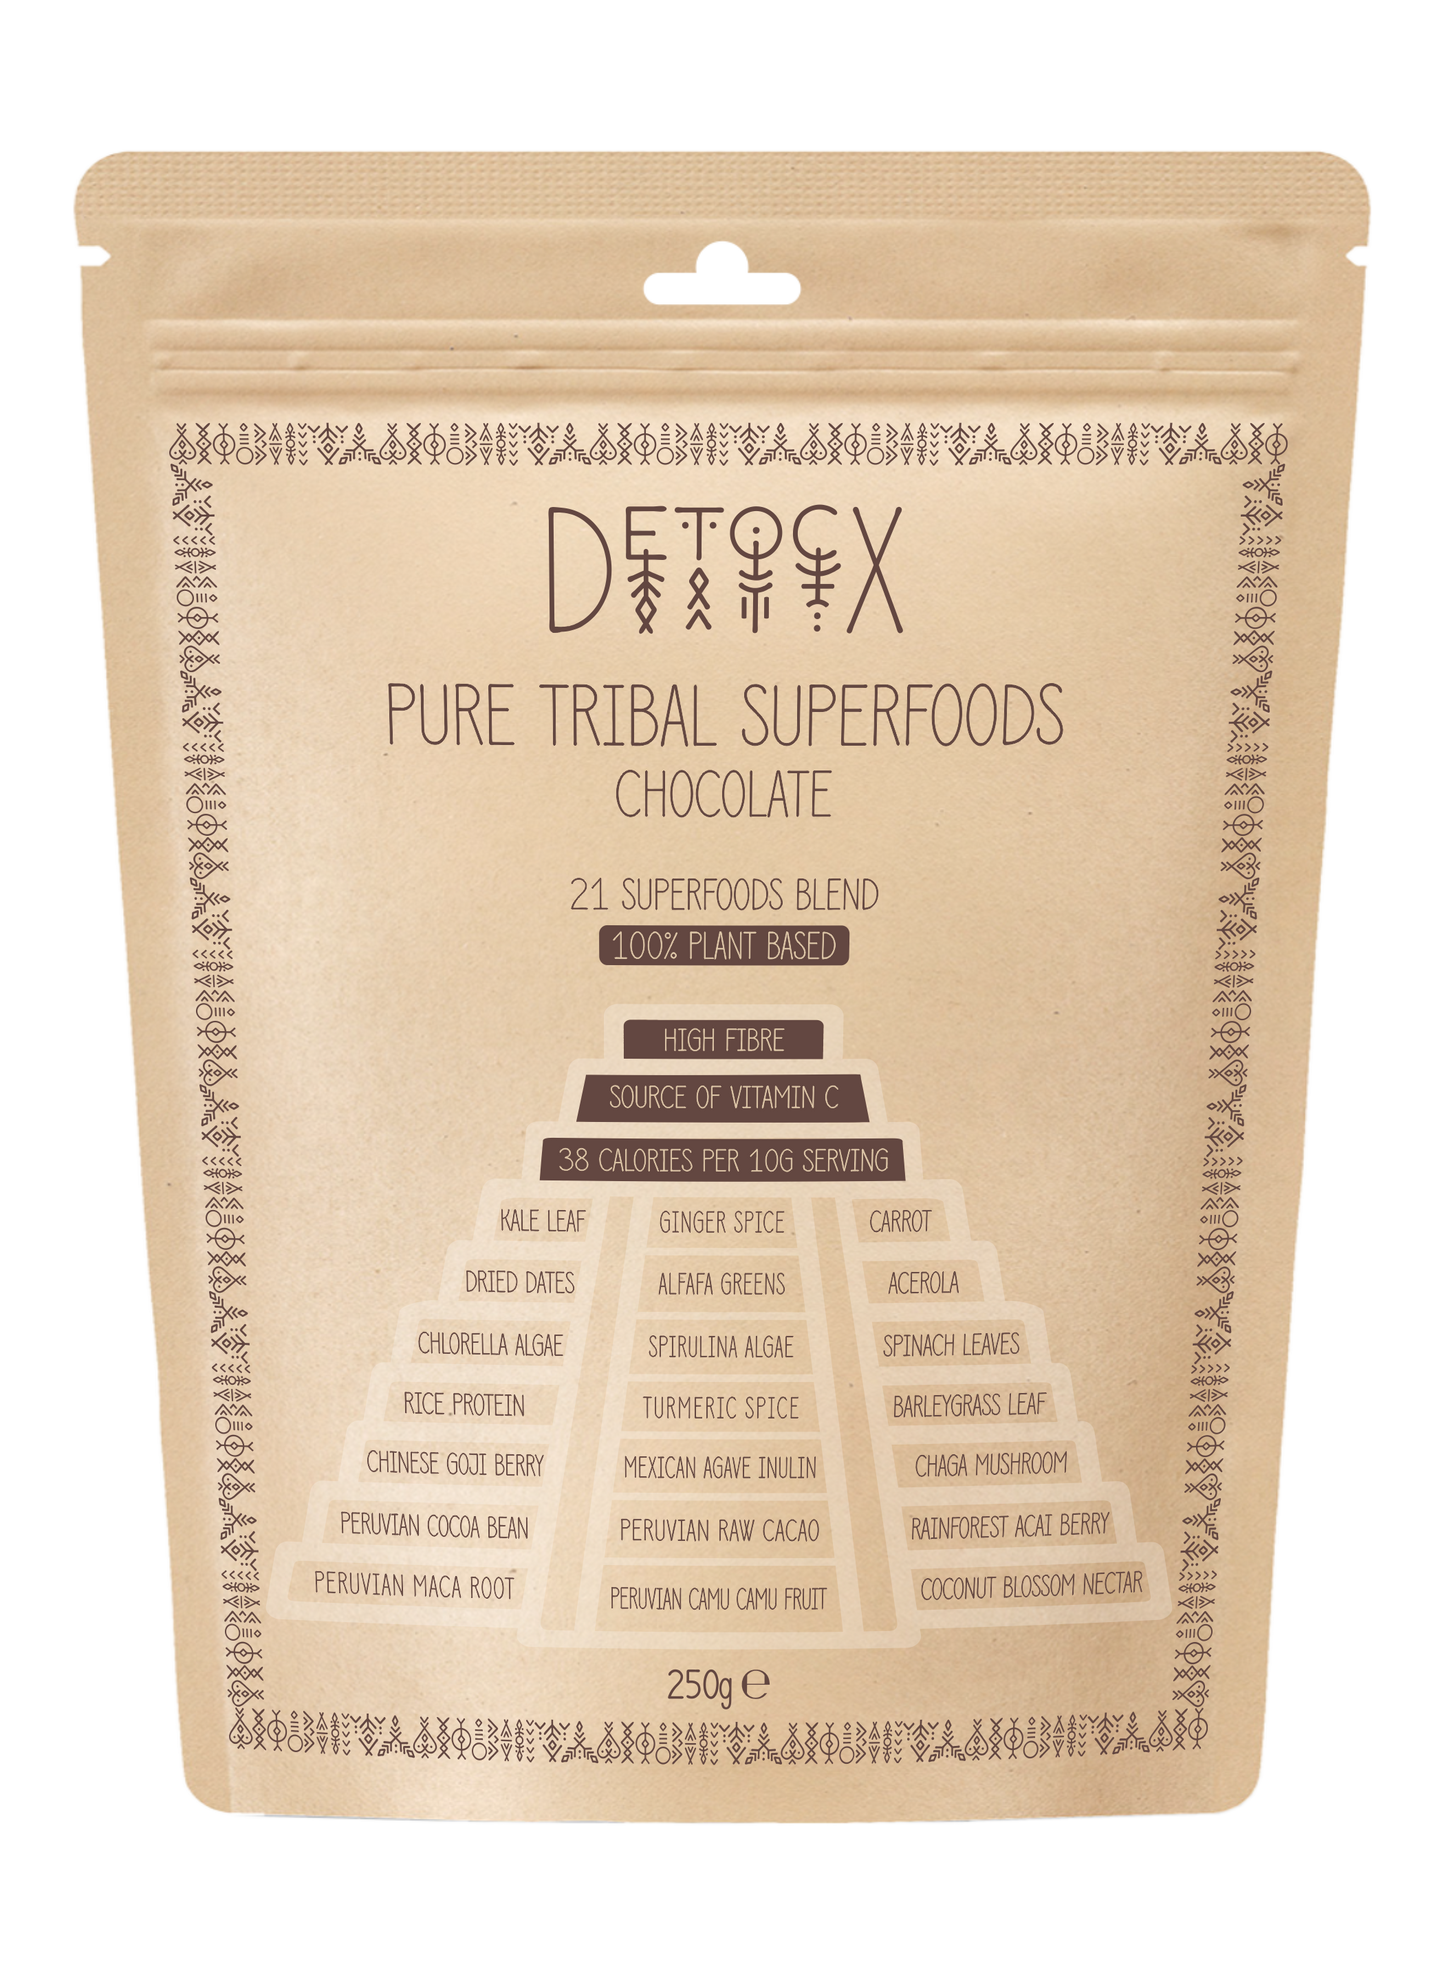 Detocx Chocolate 21 Superfoods Blend